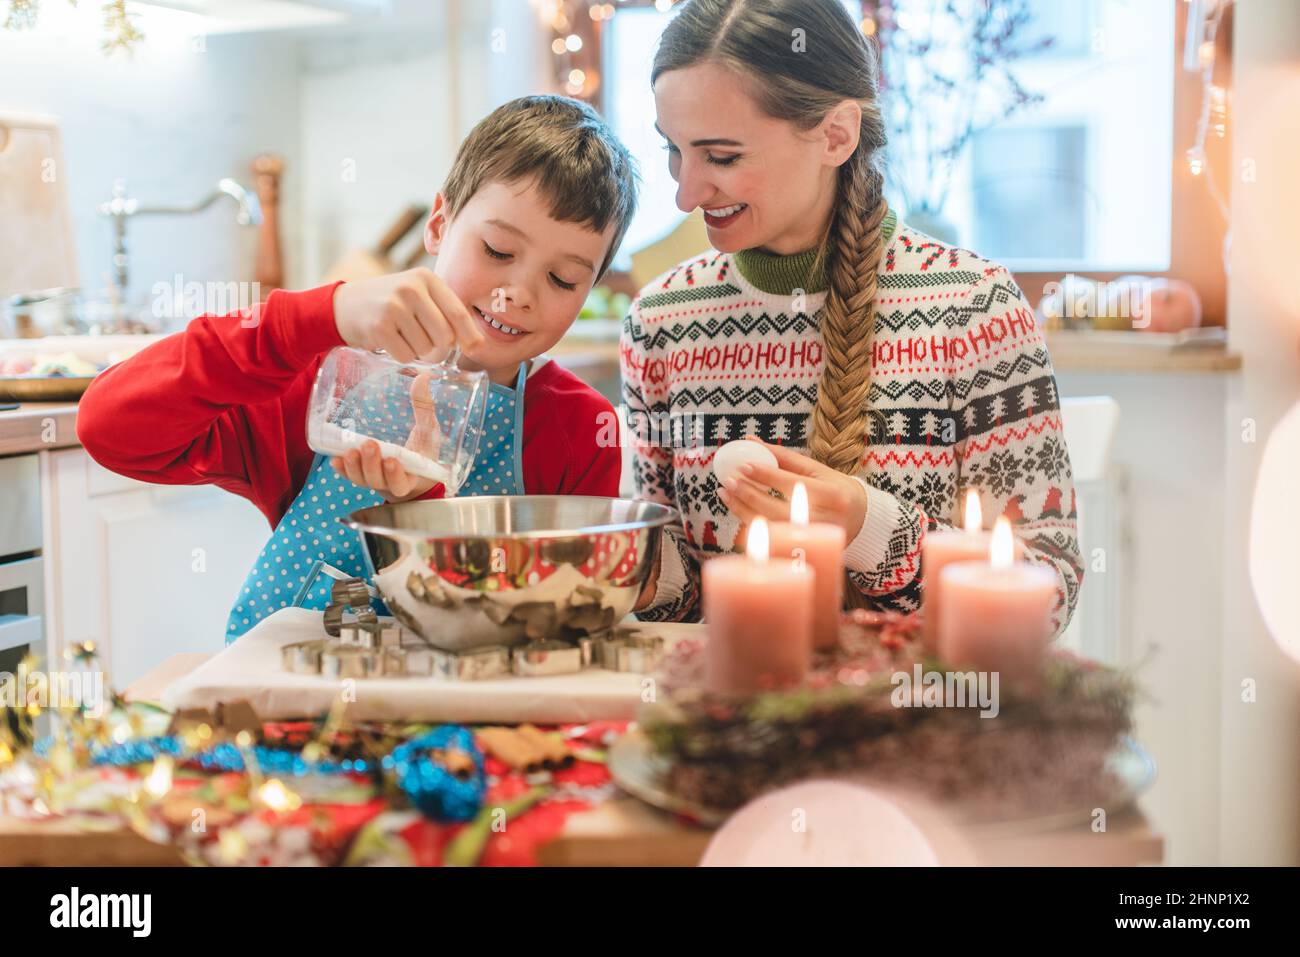 Boy mixing dough for Christmas cookies helping his mother baking in the kitchen Stock Photo